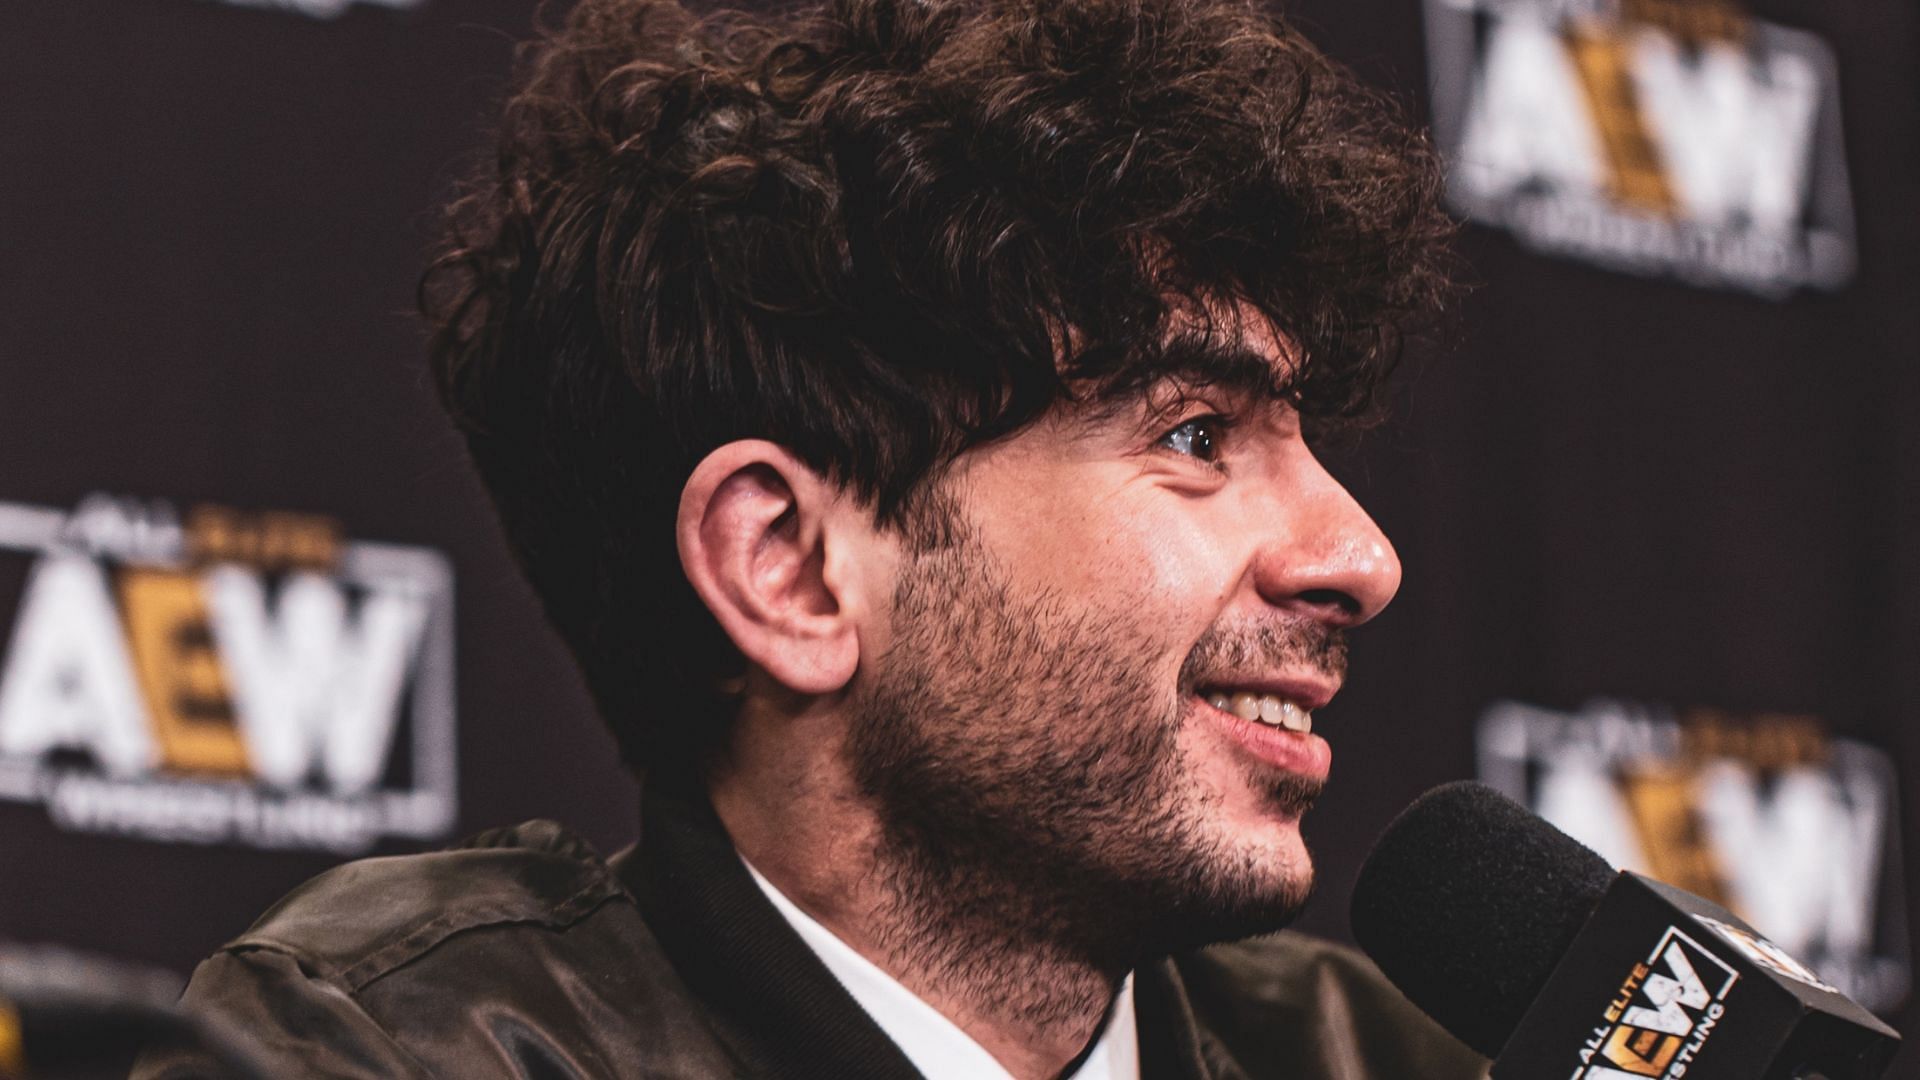 Tony Khan at AEW Double or Nothing 2022 post-show media scrum (credit: Jay Lee Photography)